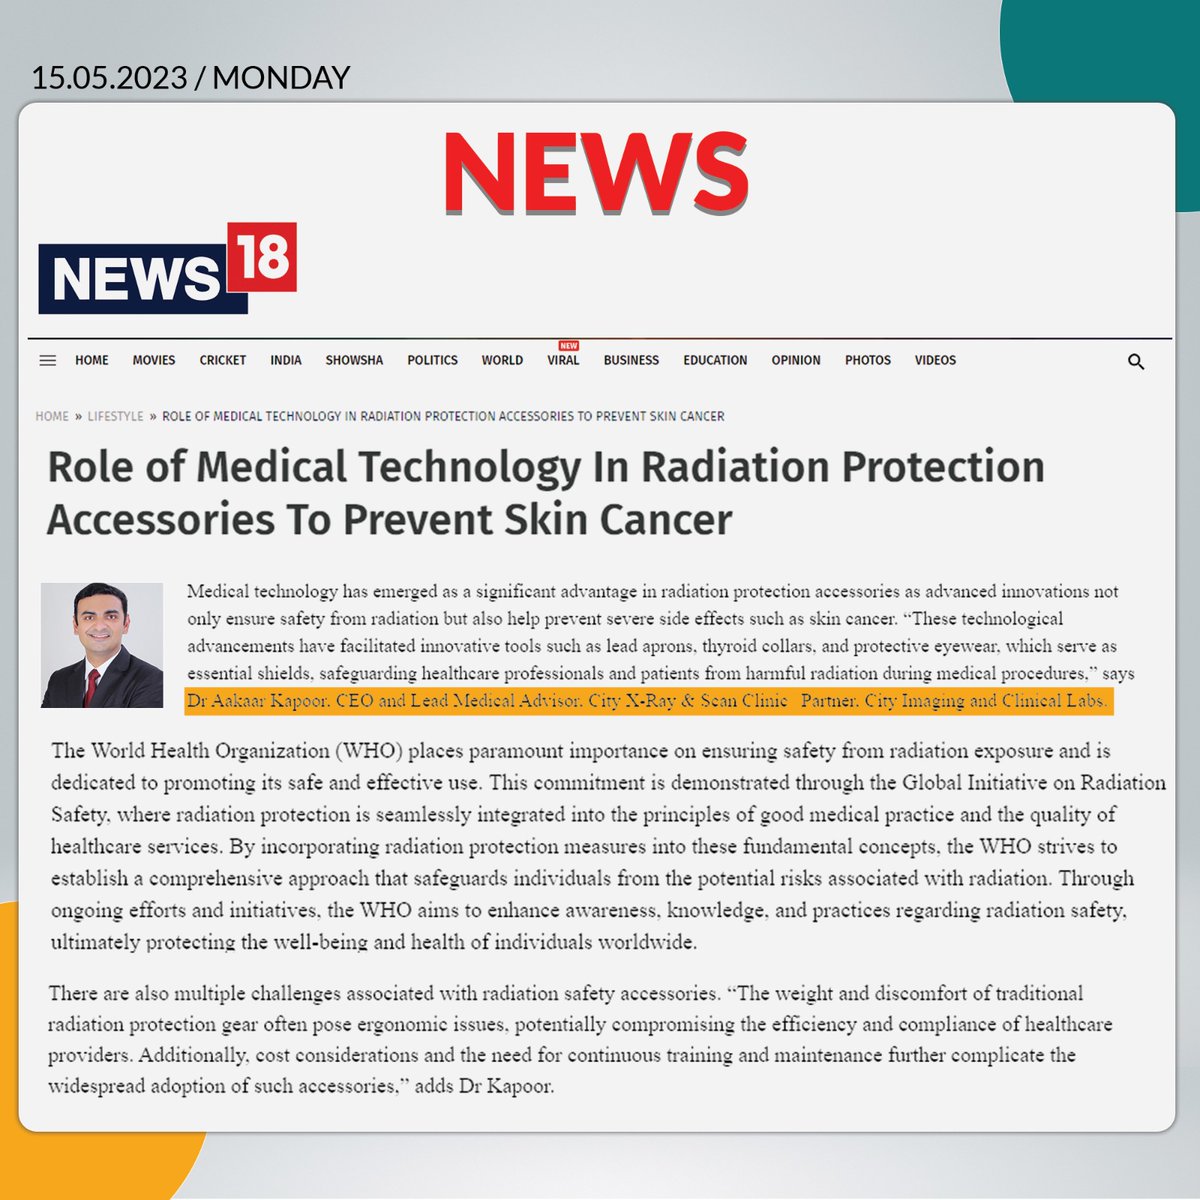 Role of #MedicalTechnology In #RadiationProtection Accessories To Prevent #SkinCancer. I have shared my views with #News18 on this topic.

Click here for more details: news18.com/lifestyle/role…

#HealthcareNews #DiagnosticNews #NewsArticles #DrAakaarKapoor #LabNews #HealthNews